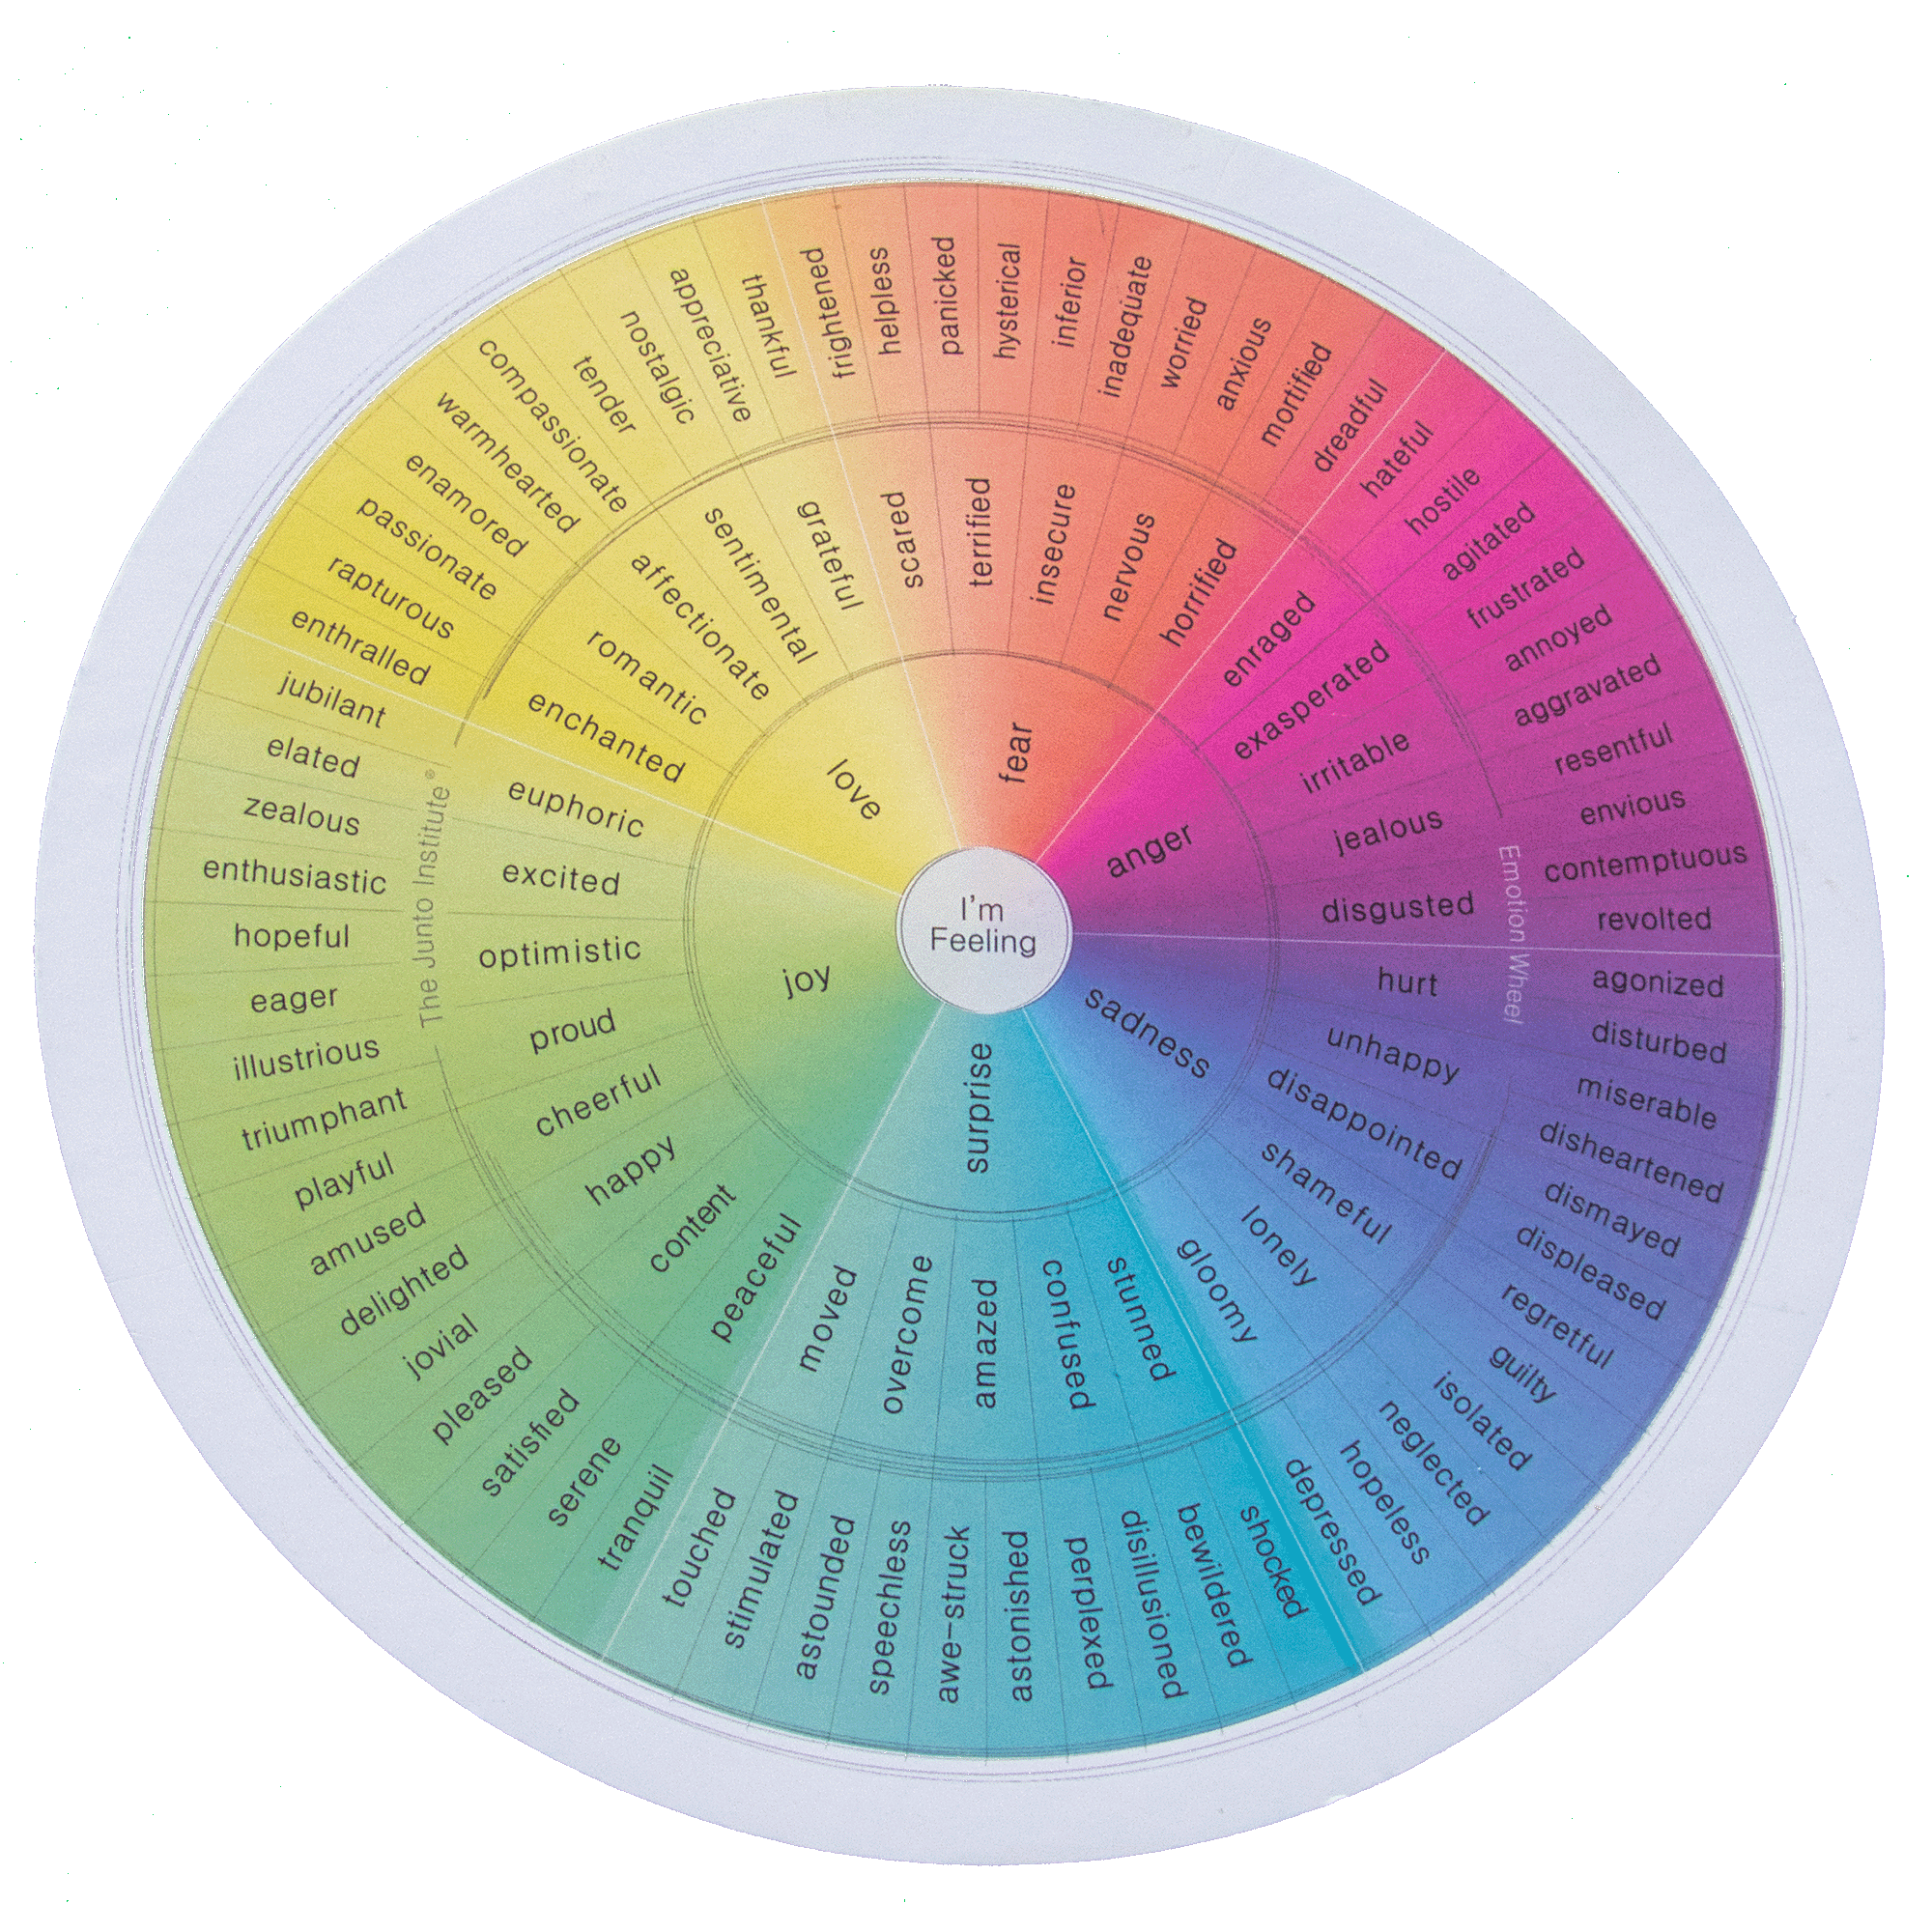 WORKING with EMOTIONS Wheel | 32 emotions for working with Emotional  Intelligence | Digital